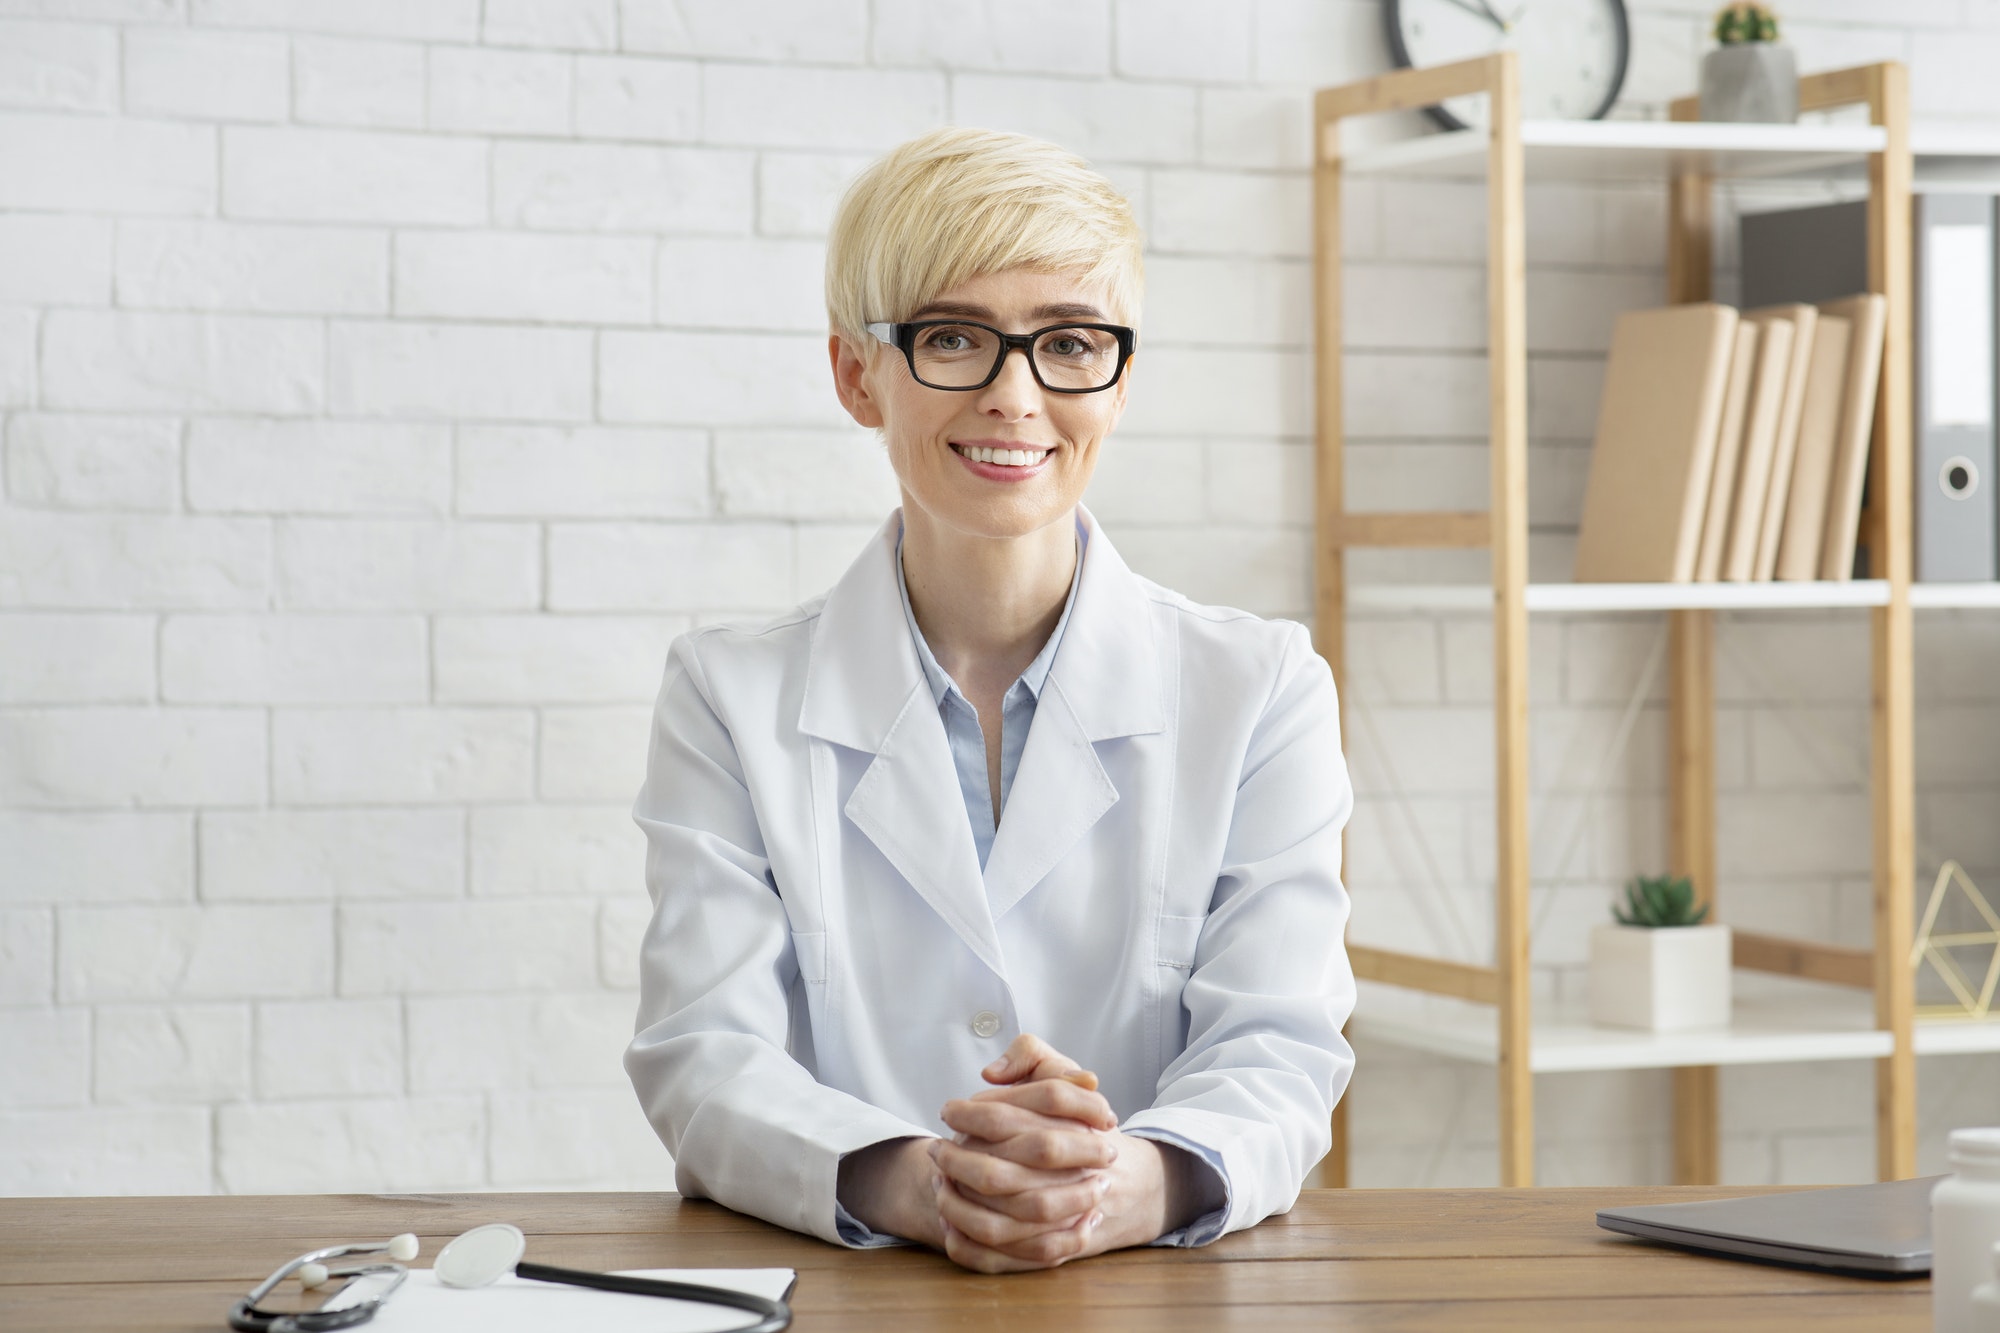 Visit to professional and health care. Smiling middle aged lady doctor sits at wooden table